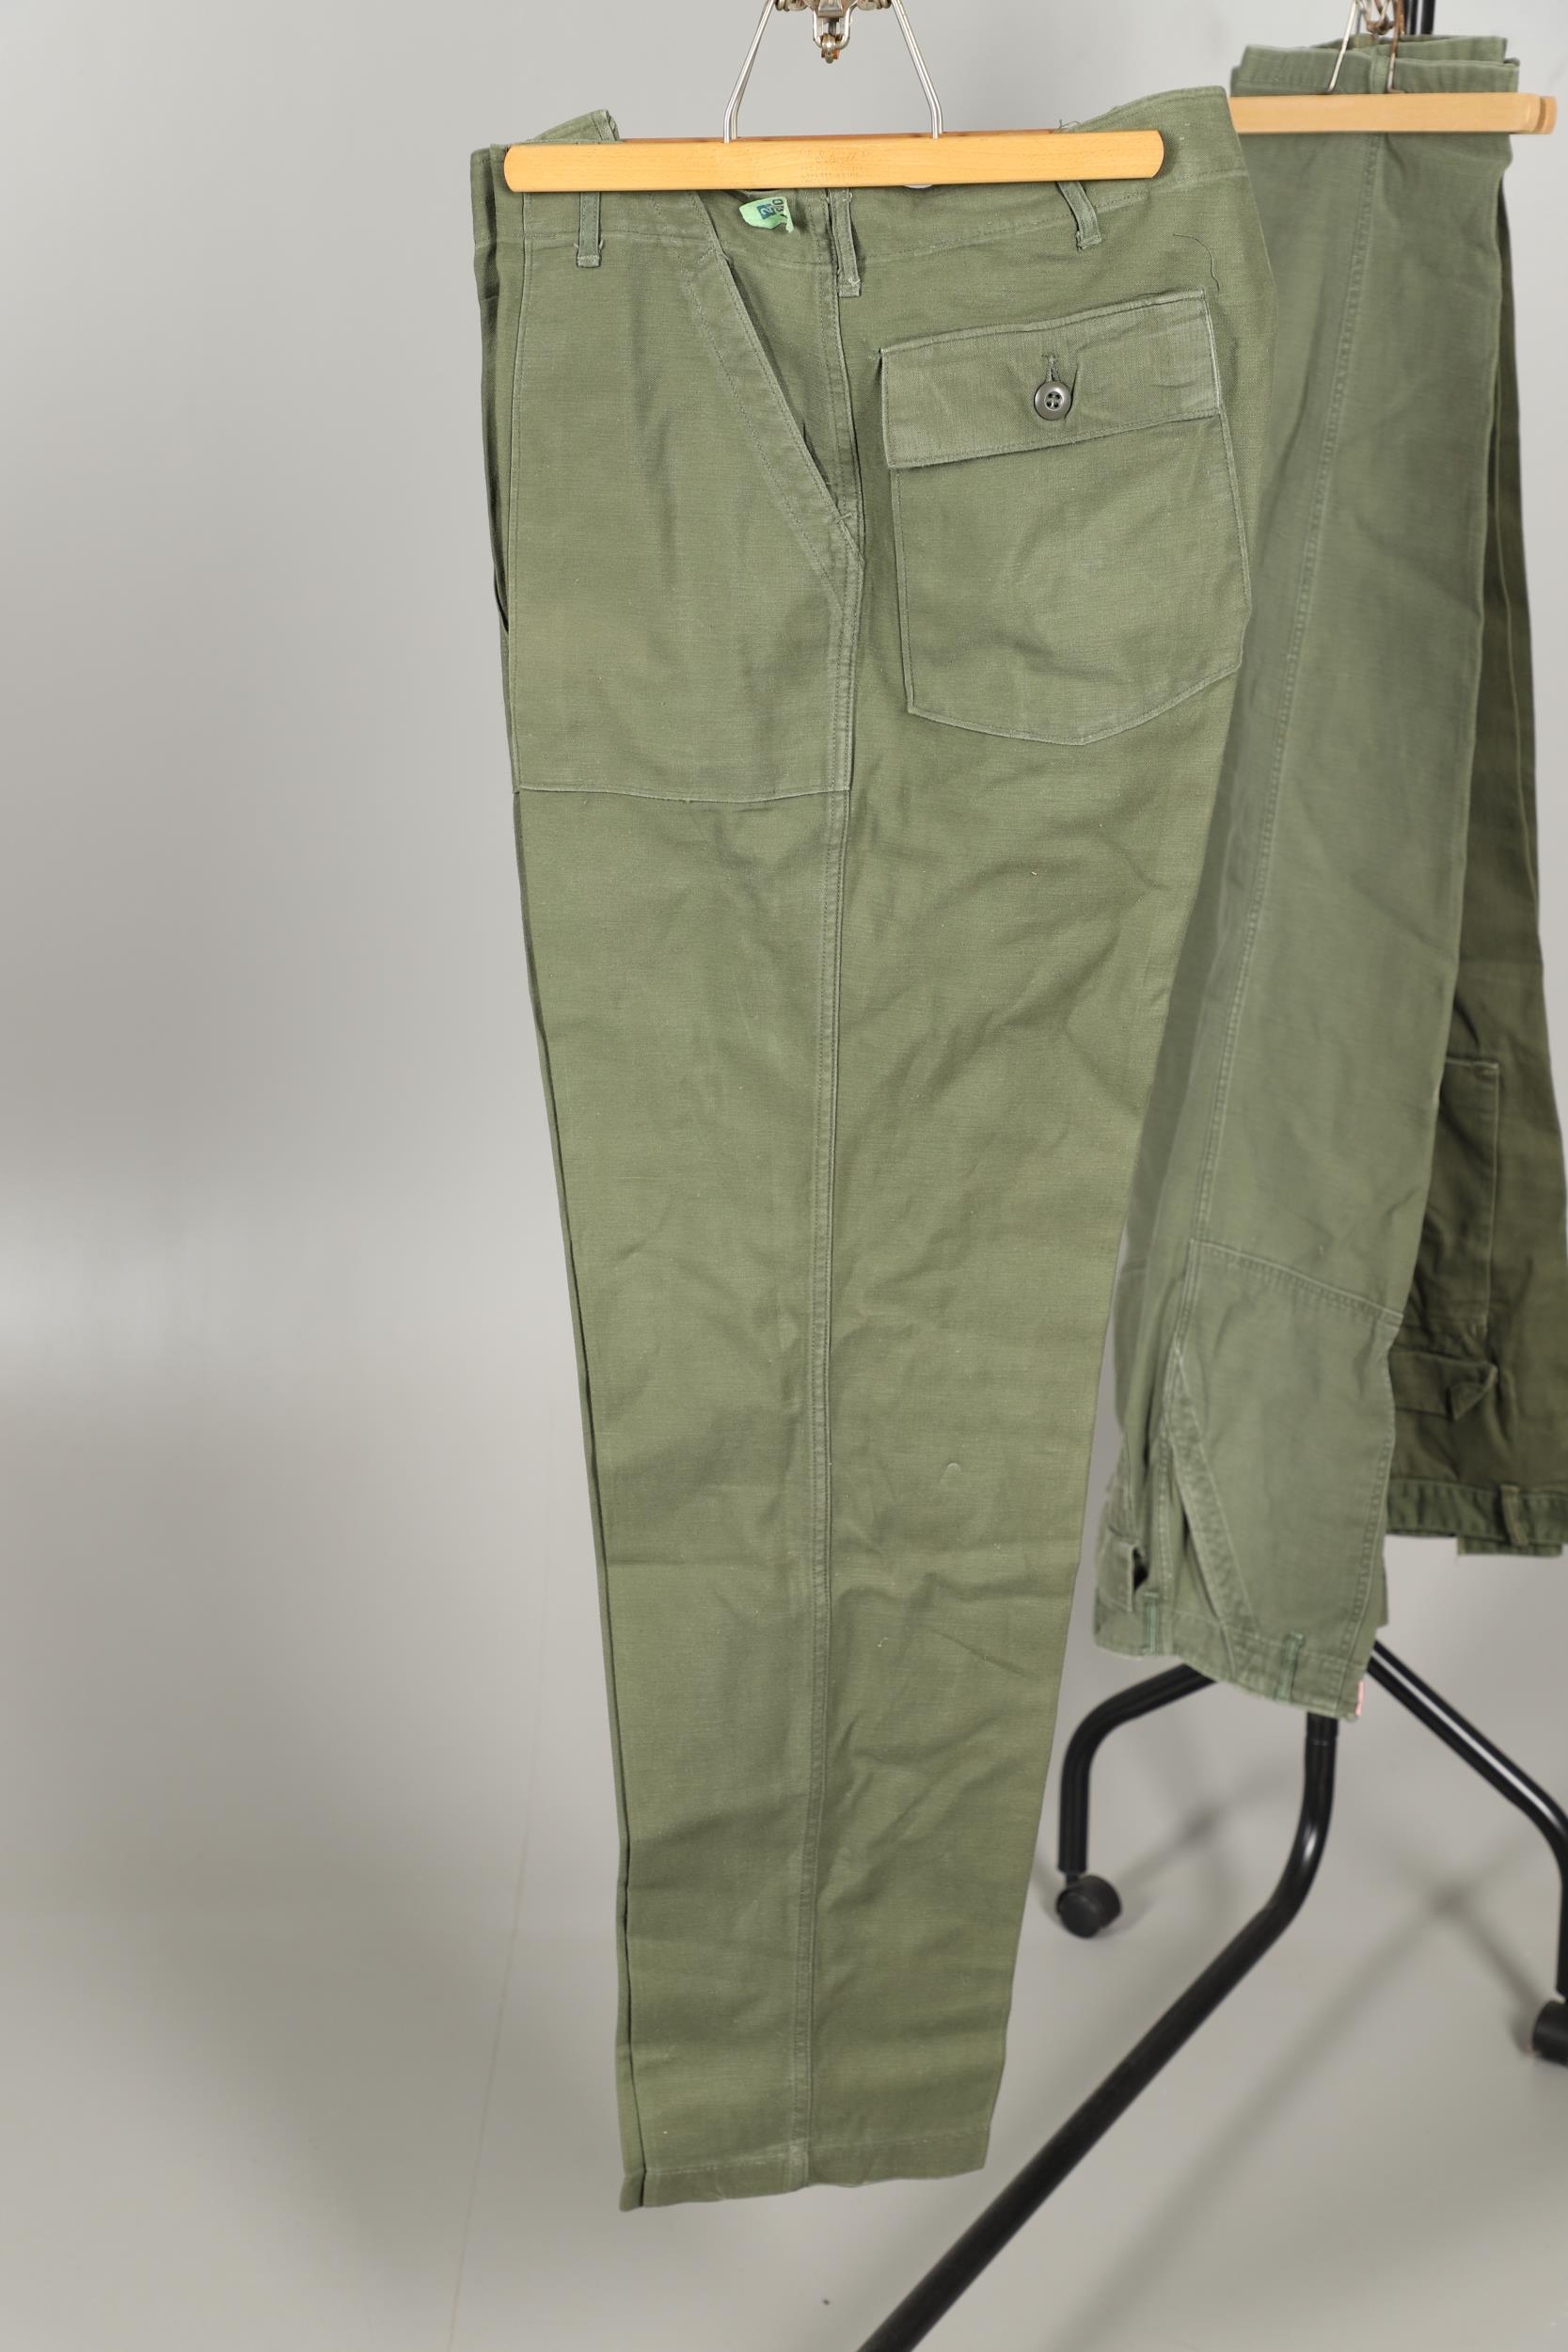 AN AMERICAN ARMY M65 FIELD COAT AND OTHERS. - Image 12 of 15